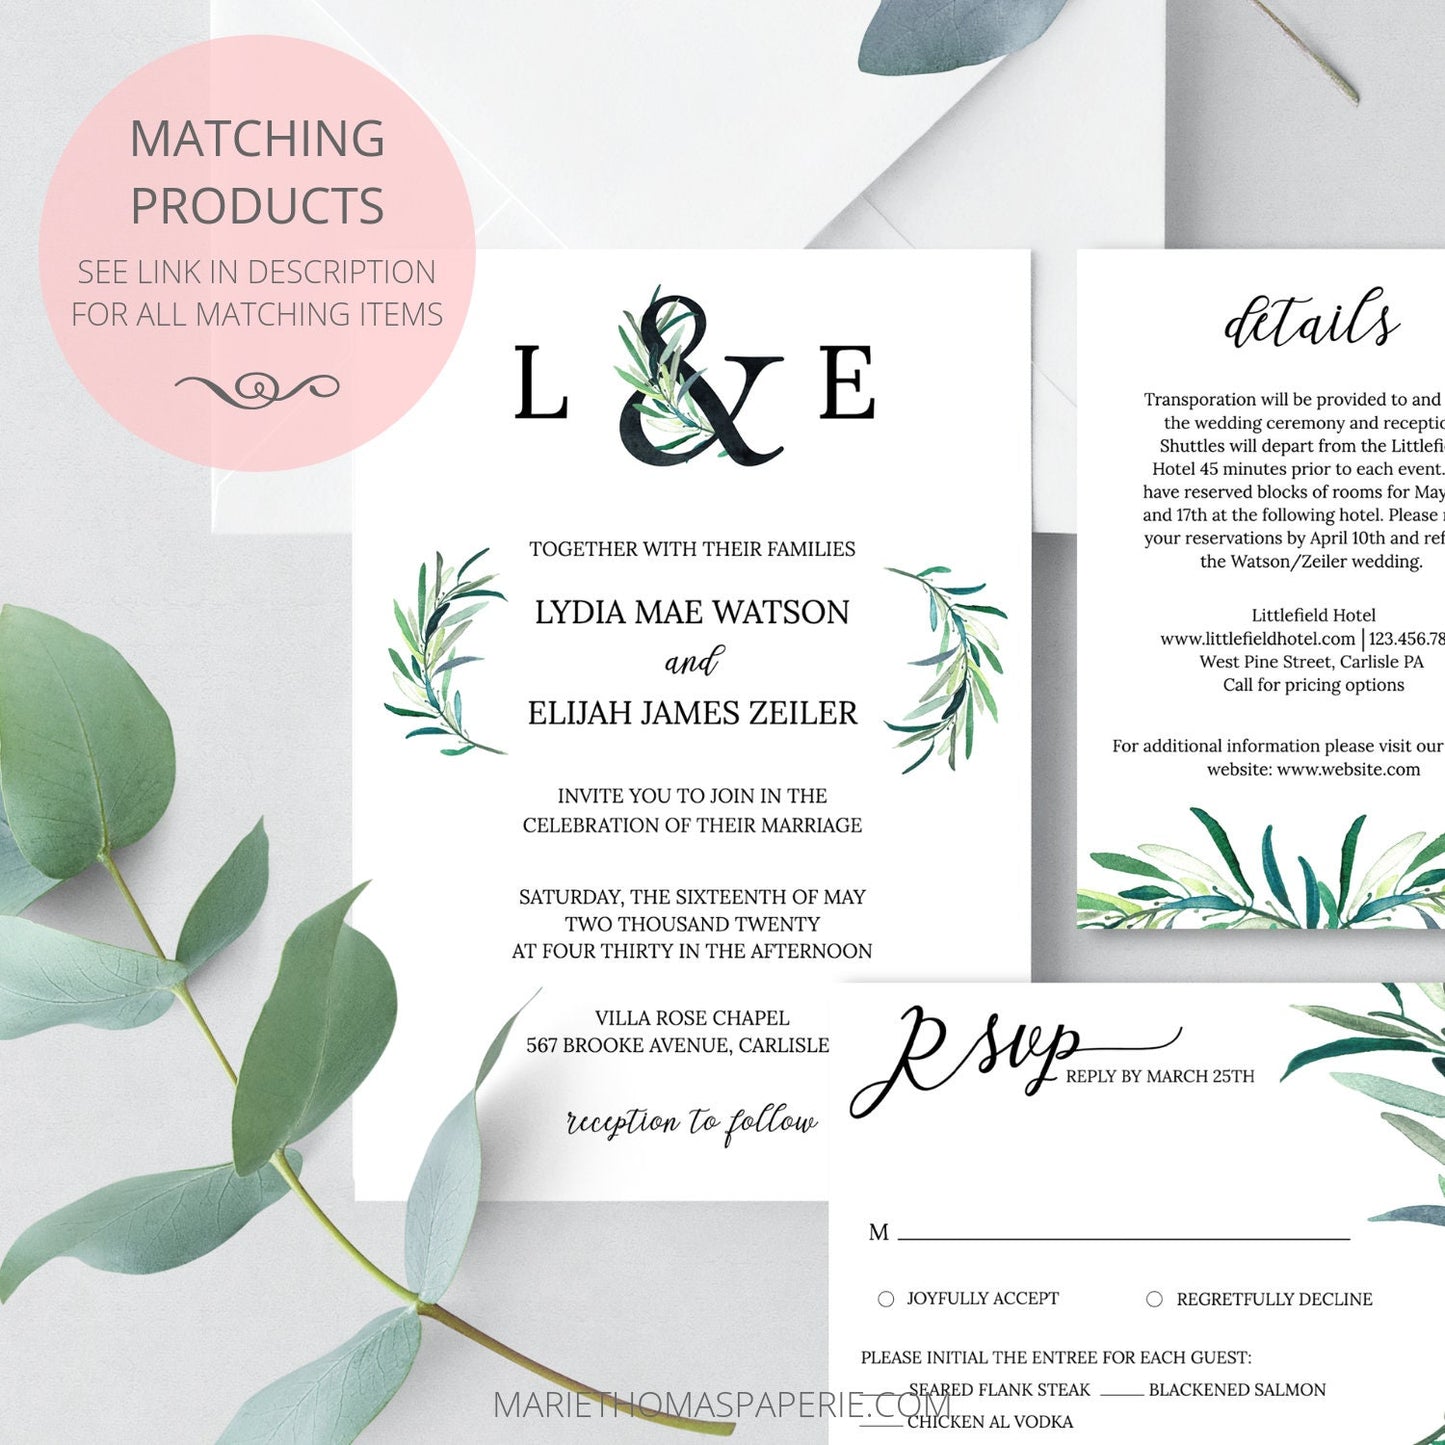 Editable Will You Be My Bridesmaid Card Bridesmaid Proposal Card Greenery Bridal Proposal Maid of Honor Proposal Template